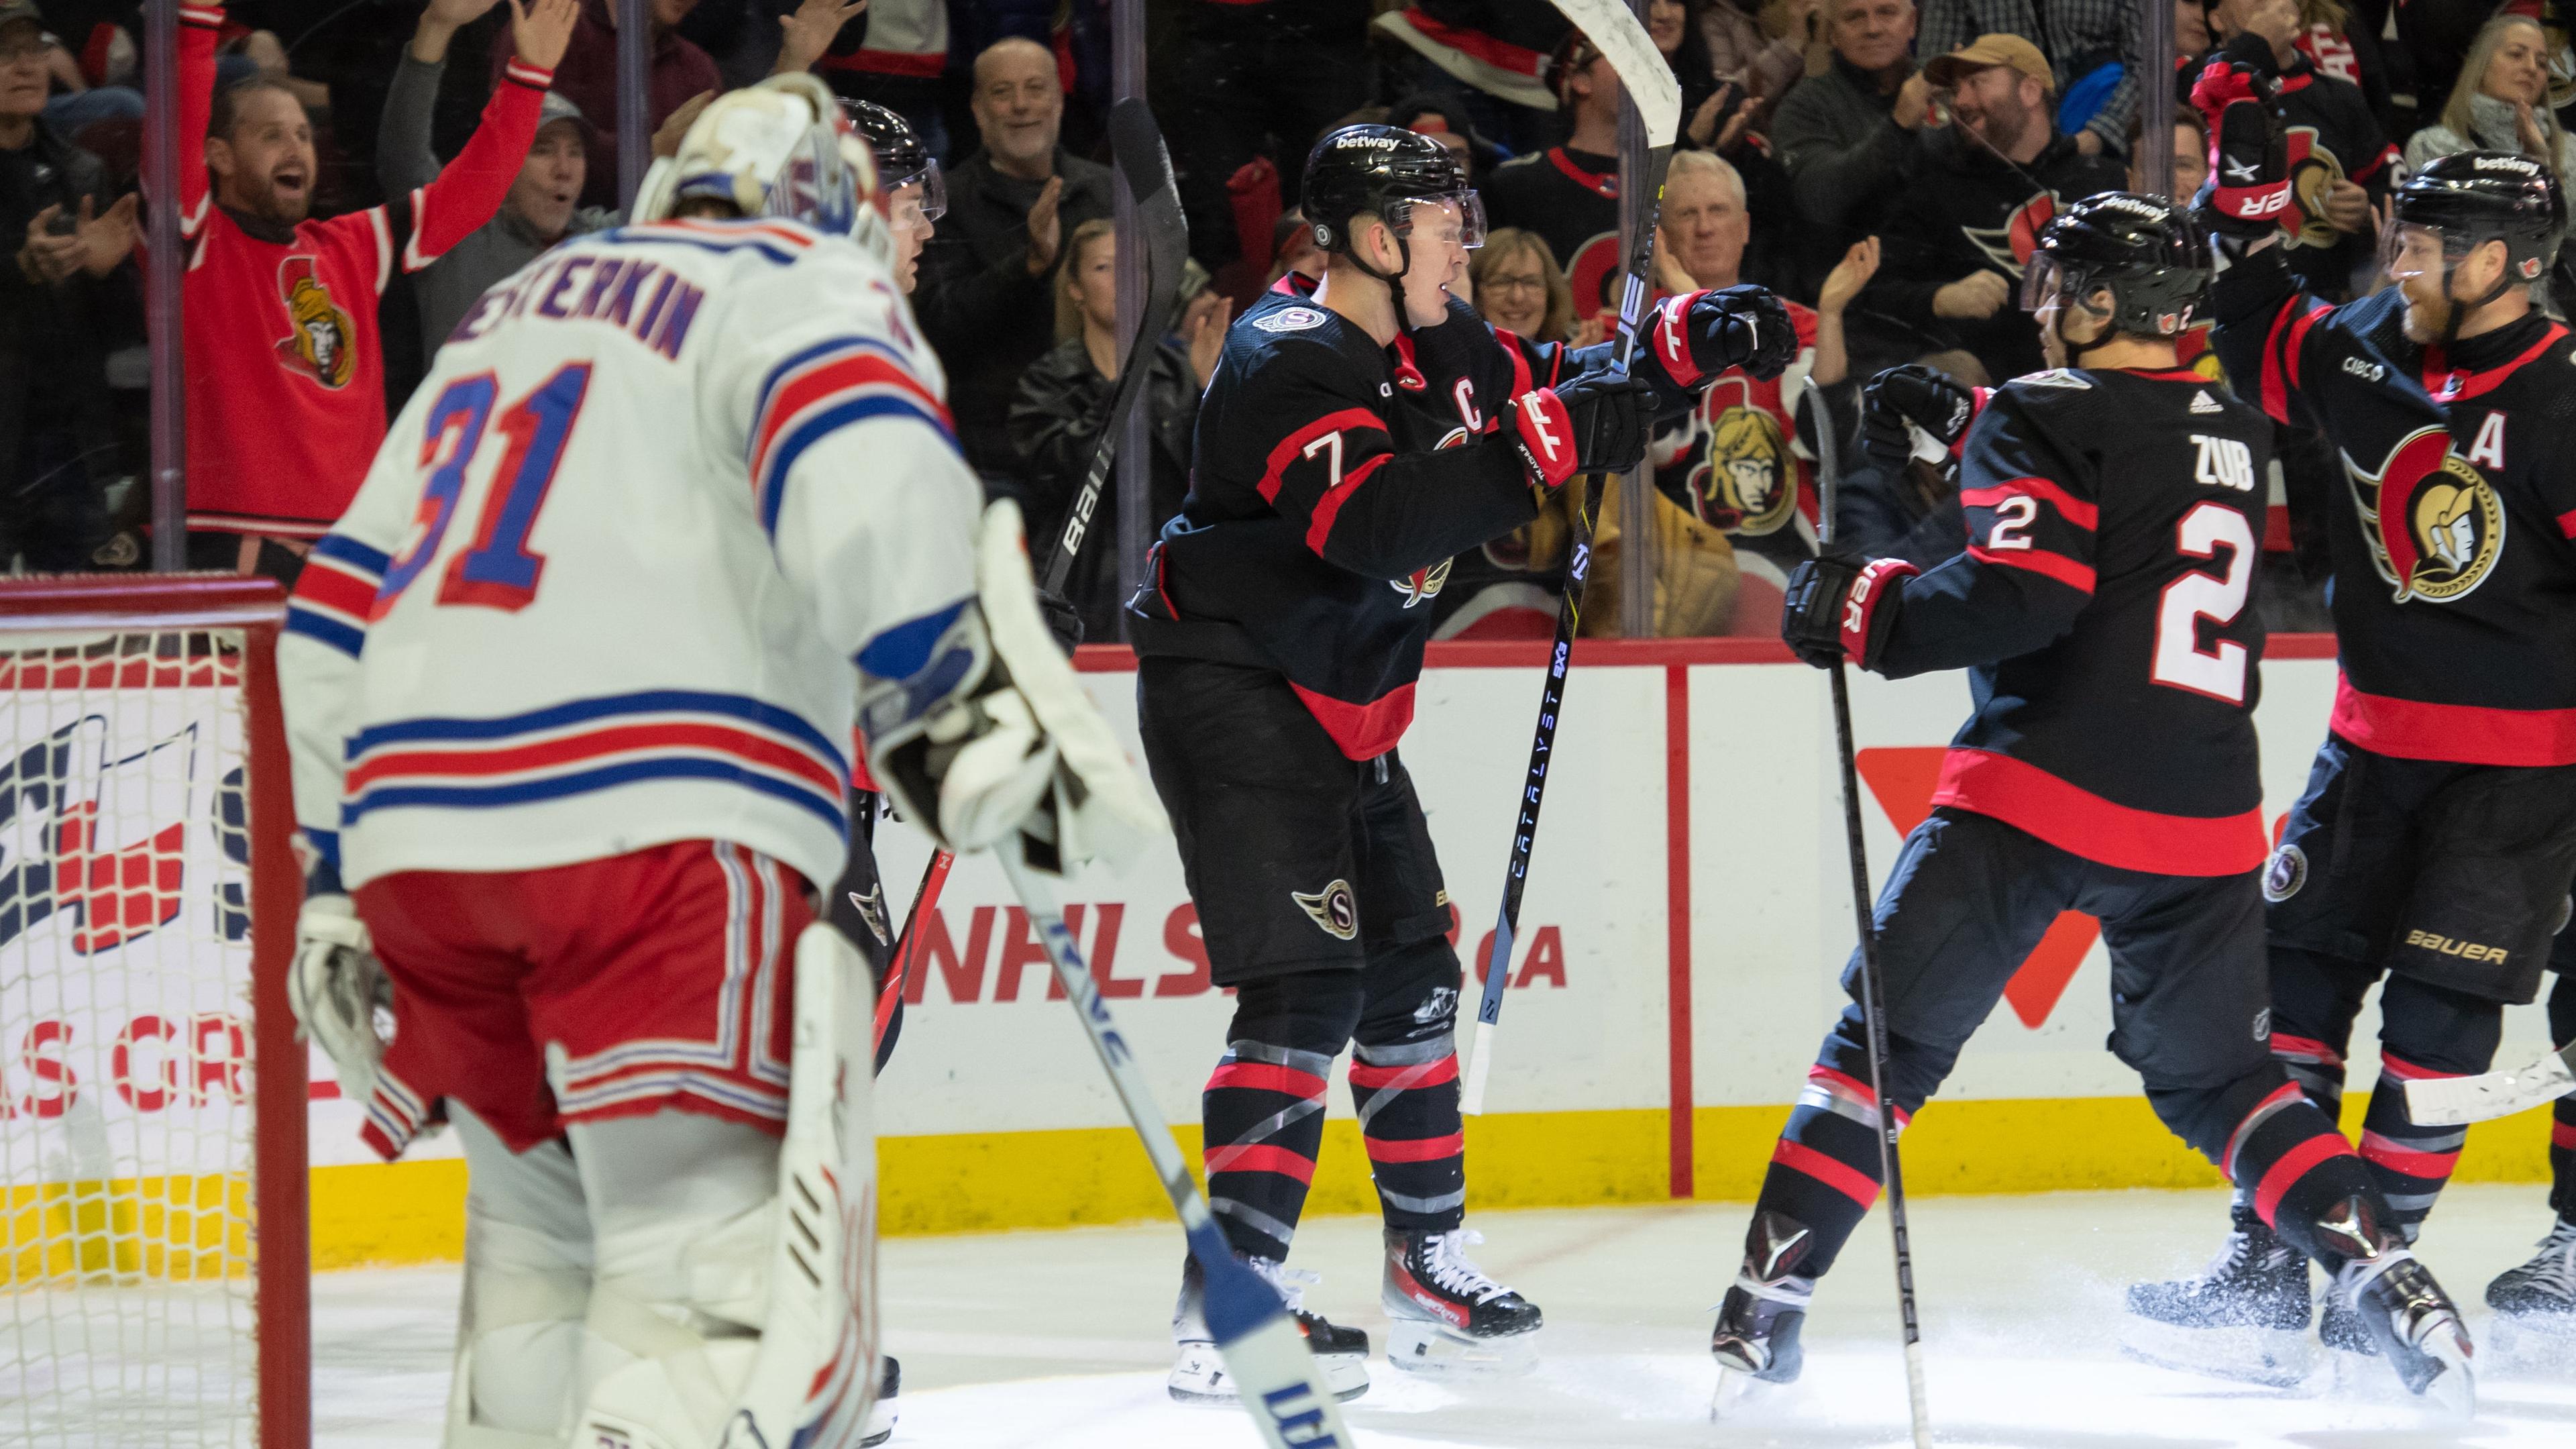 Ottawa Senators left wing Brady Tkachuk (7) celebrates with team his goal scored against New York Rangers goalie Igor Shesterkin (31) in the first period at the Canadian Tire Centre / Mark DesRosiers - USA TODAY Sports